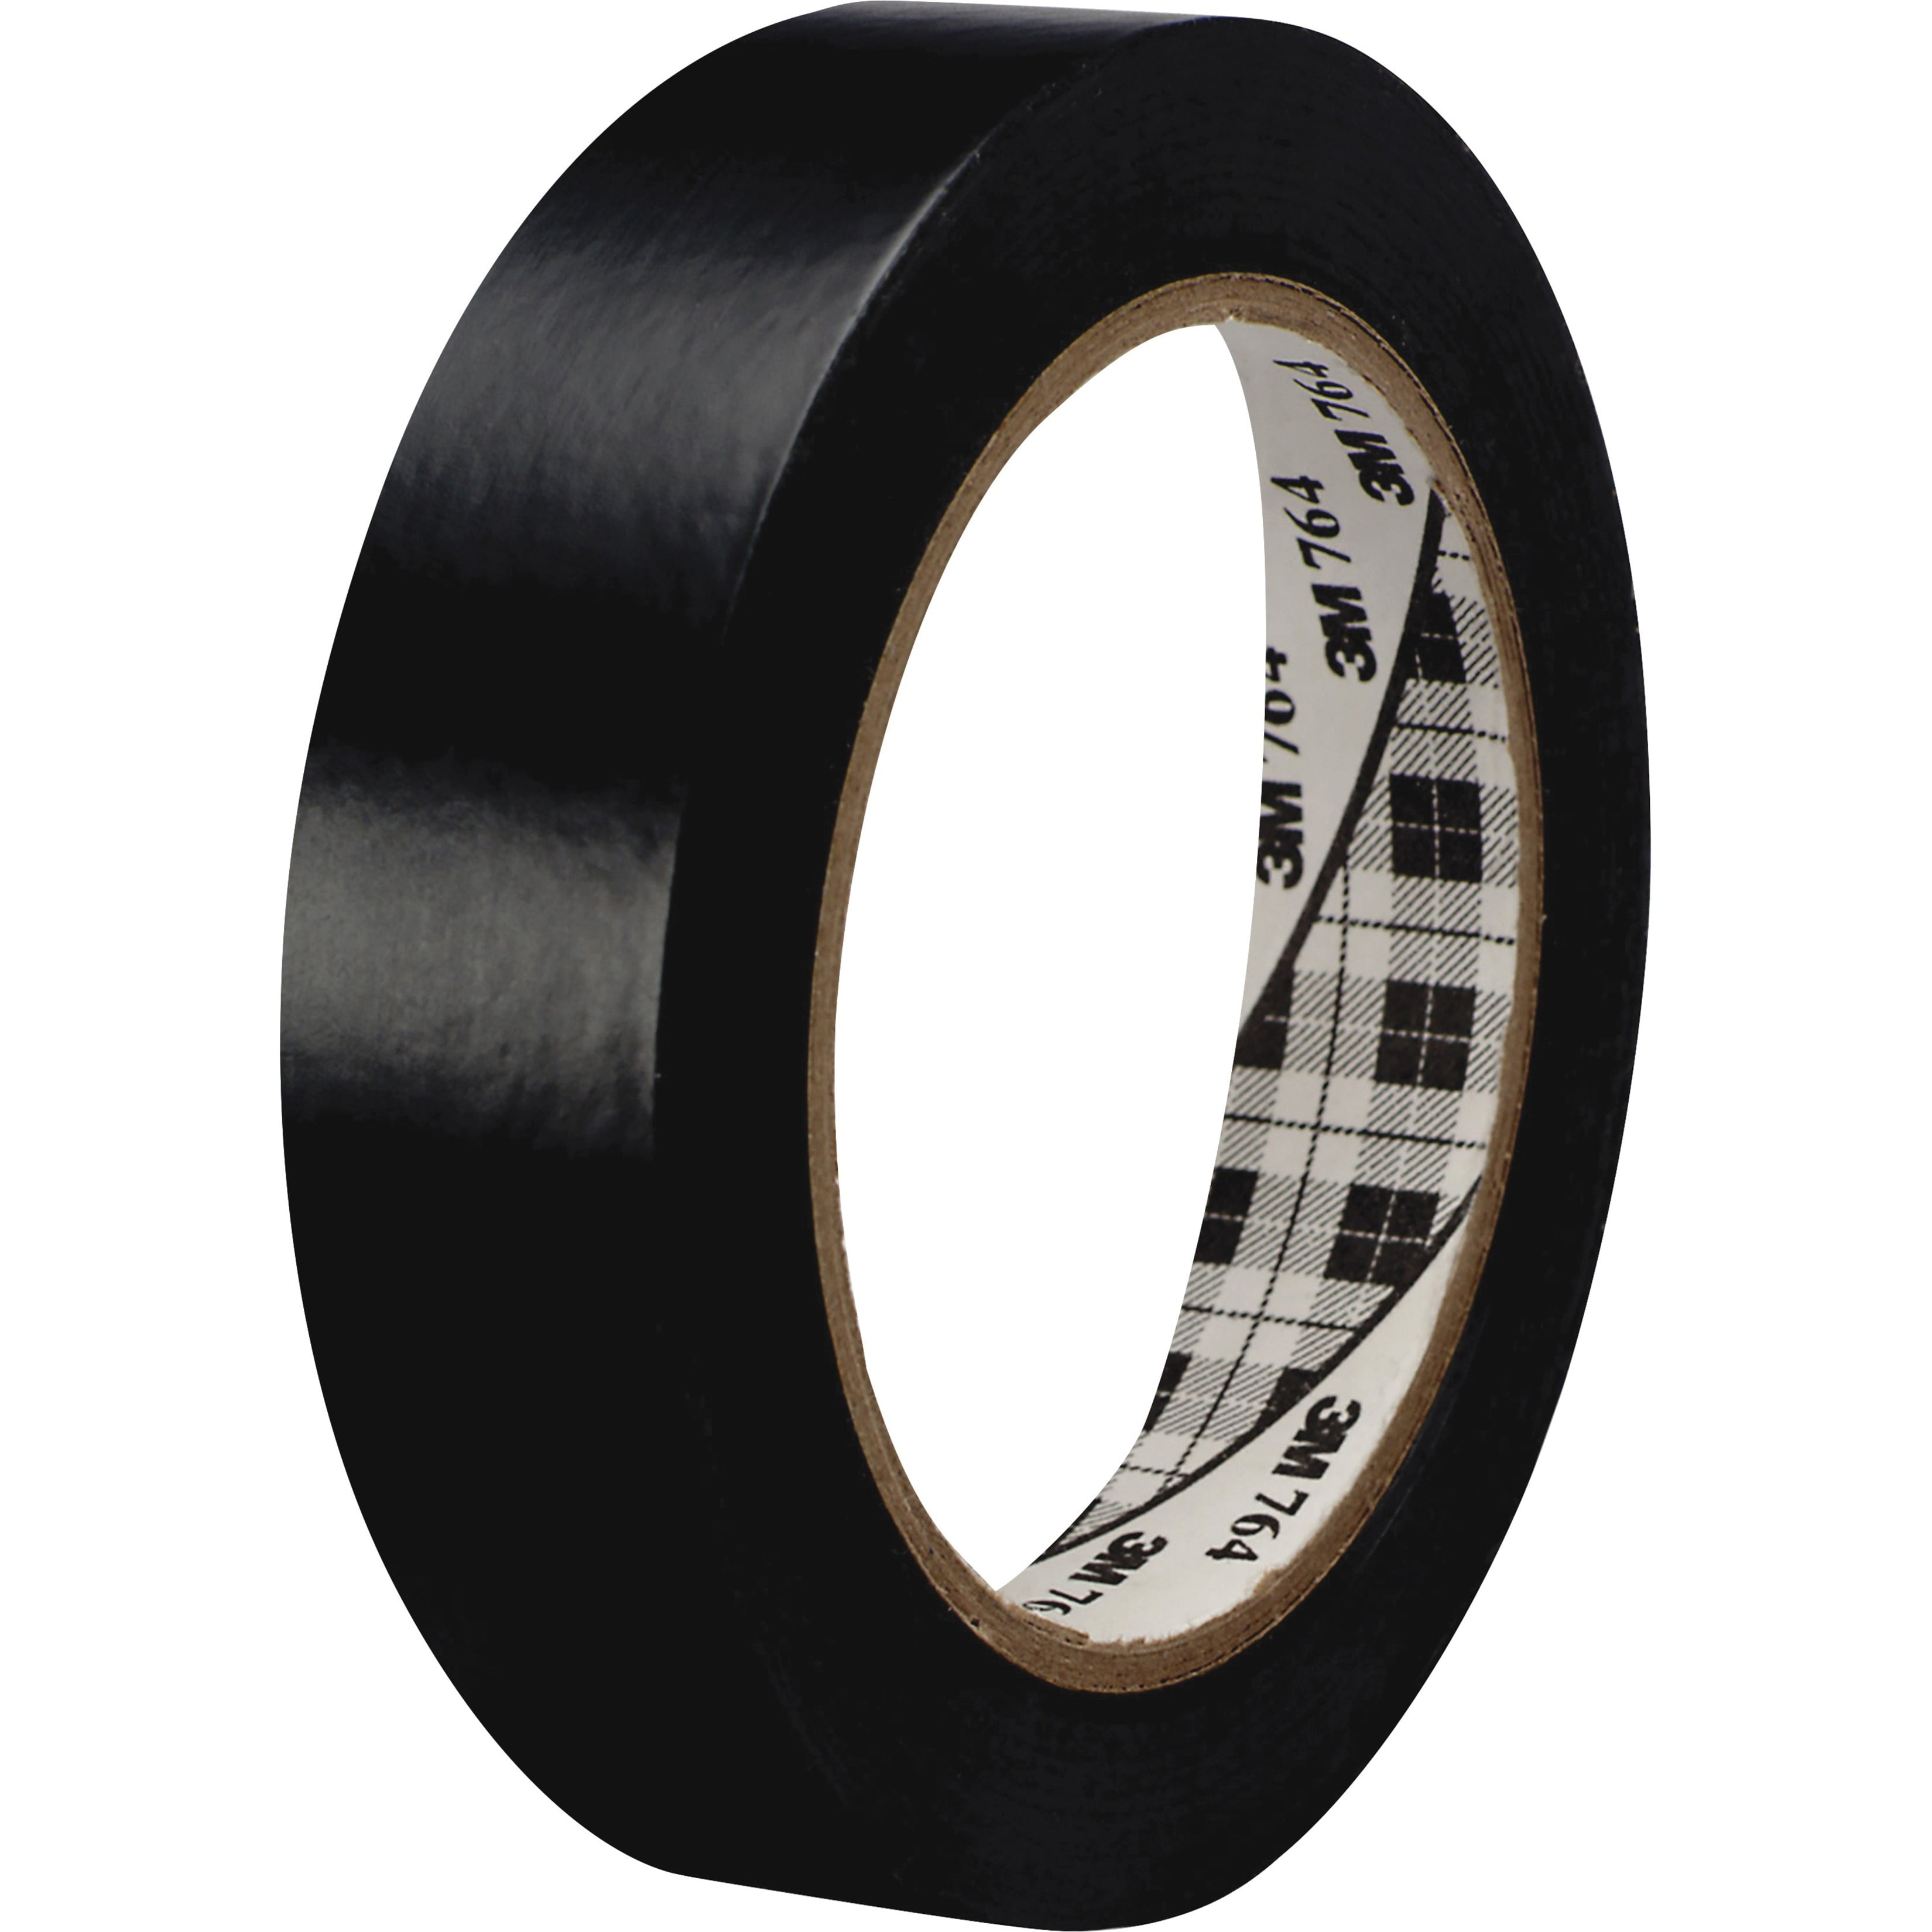 3M Double Sided Mounting Tape 5925 VHB Black Foam Tape High Bond Waterproof  Heavy Duty Strong Adhesive Tape Thick 0.025 in Fastener Replace Décor